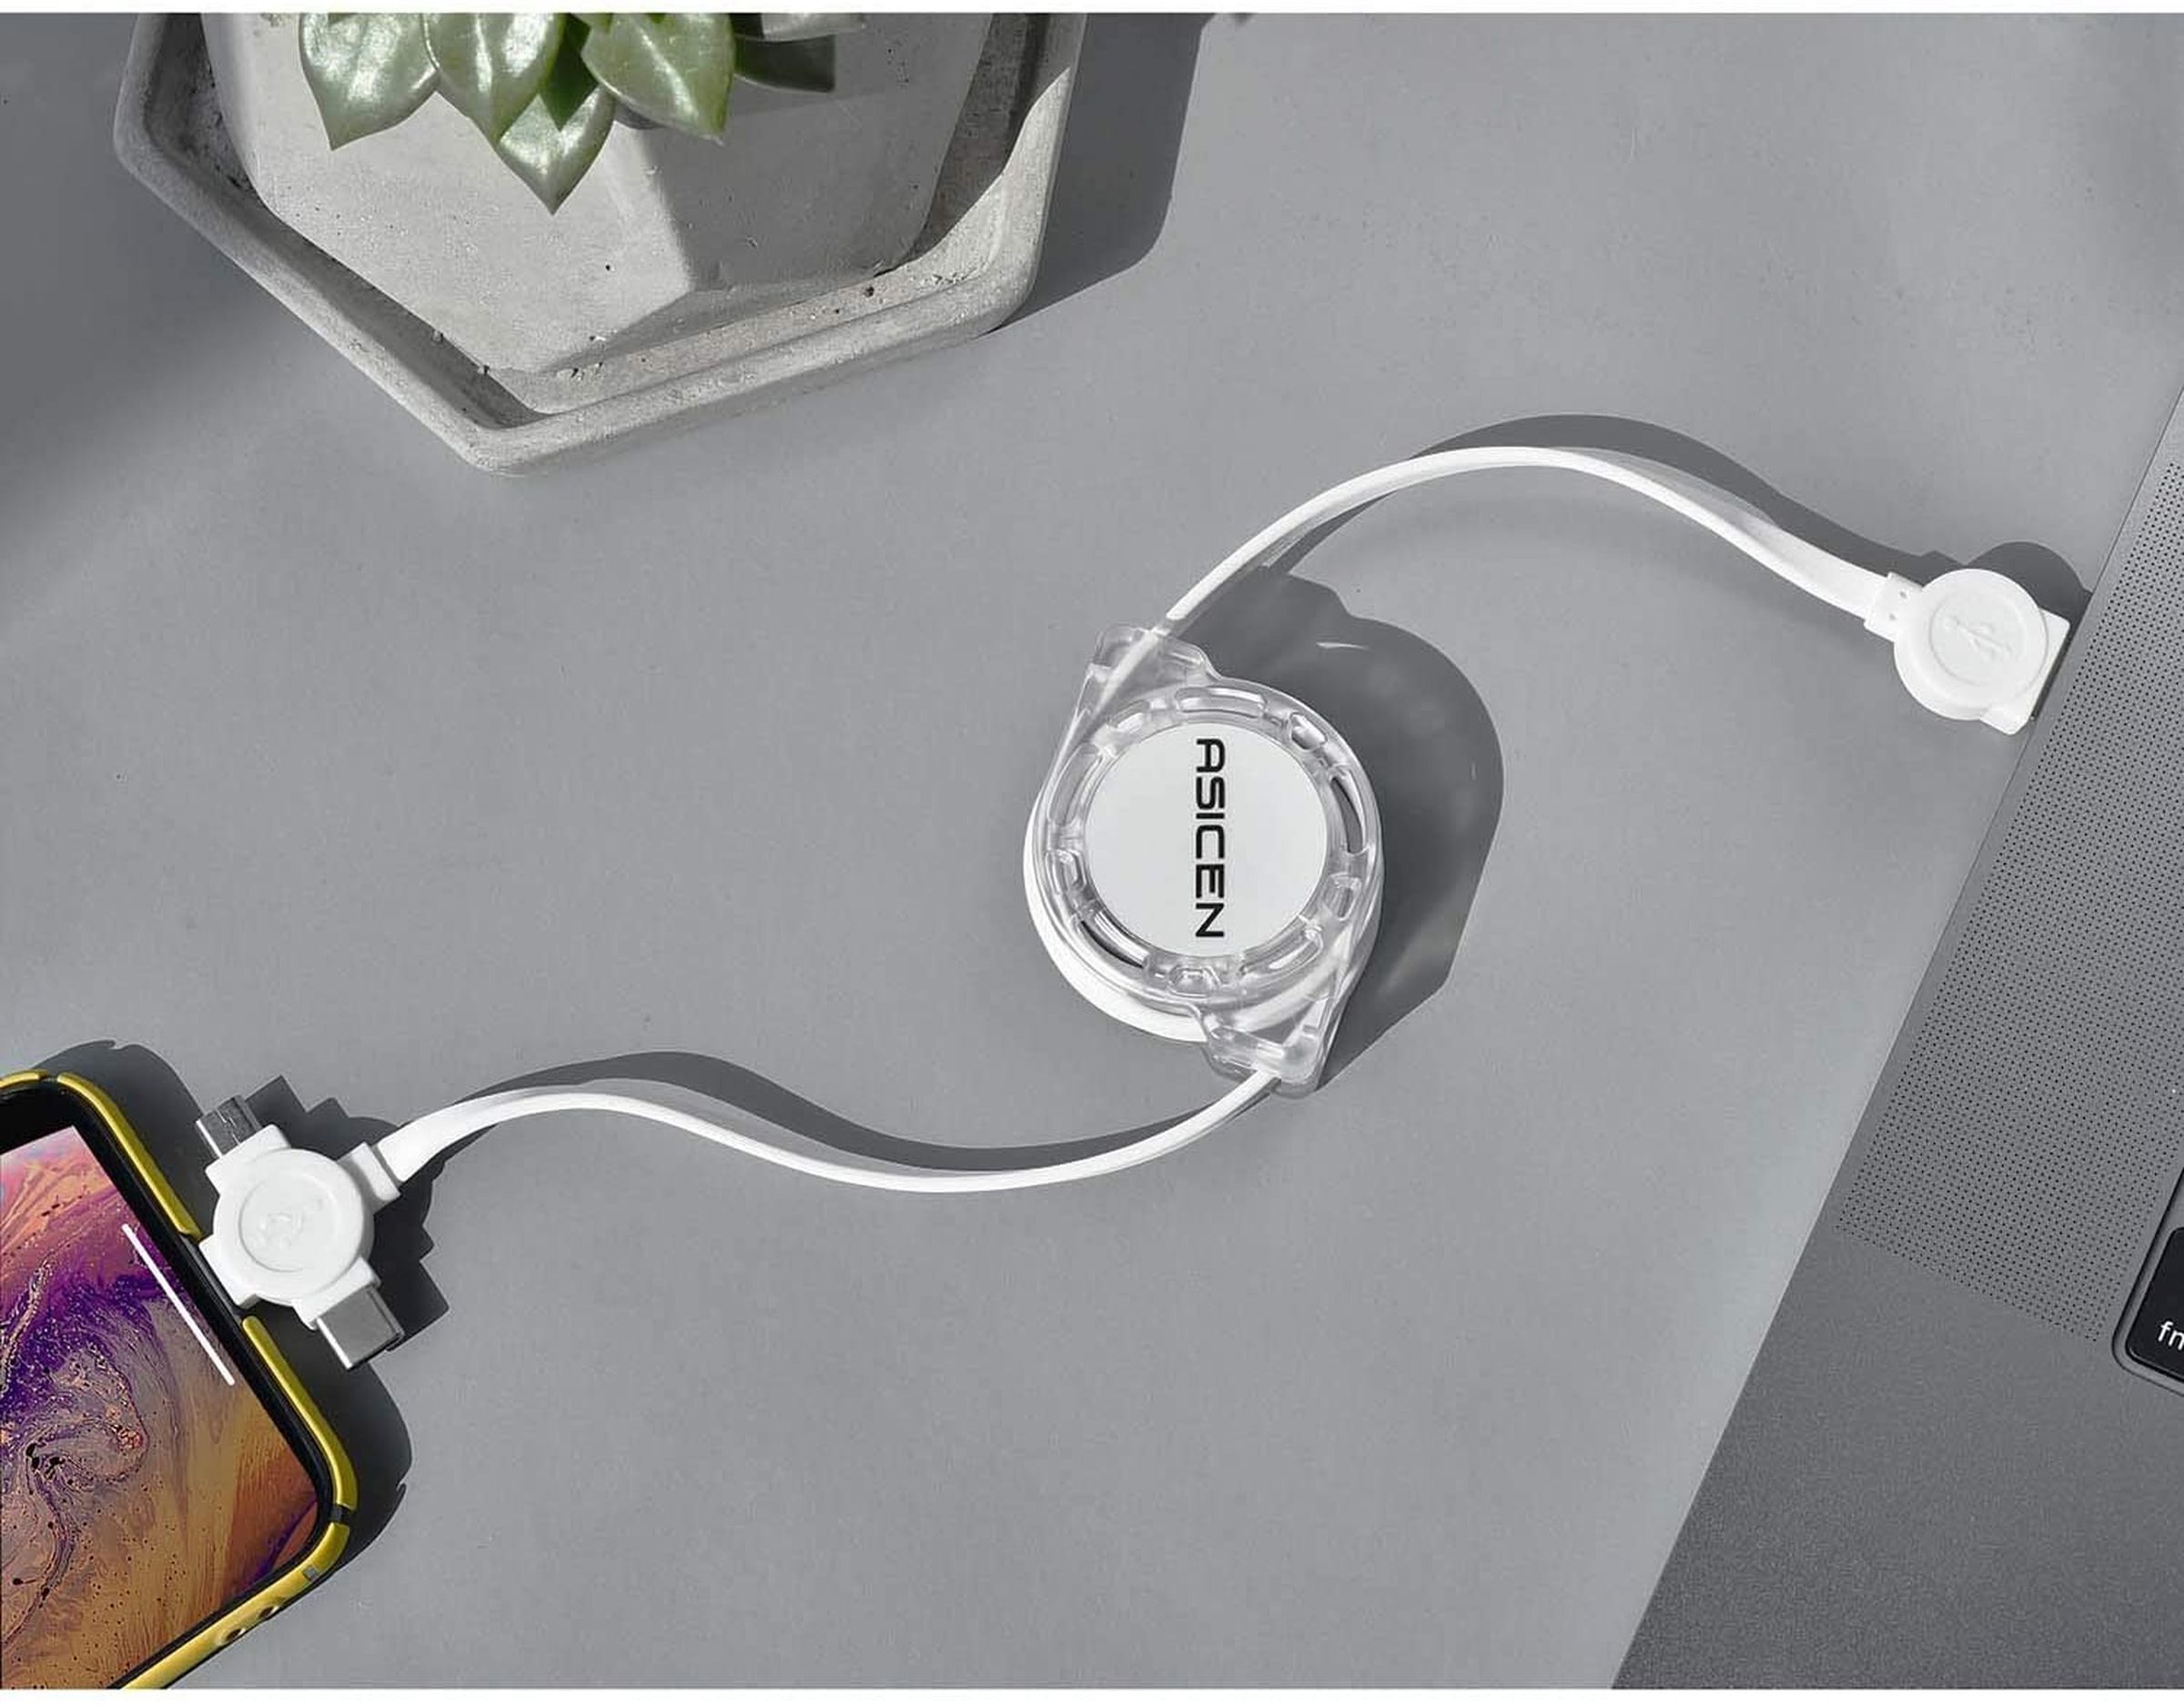 Asicen’s 3-in-1 charging cable is one of the handiest cables around, uniting iPhone and Android users with one multi-prong connector.